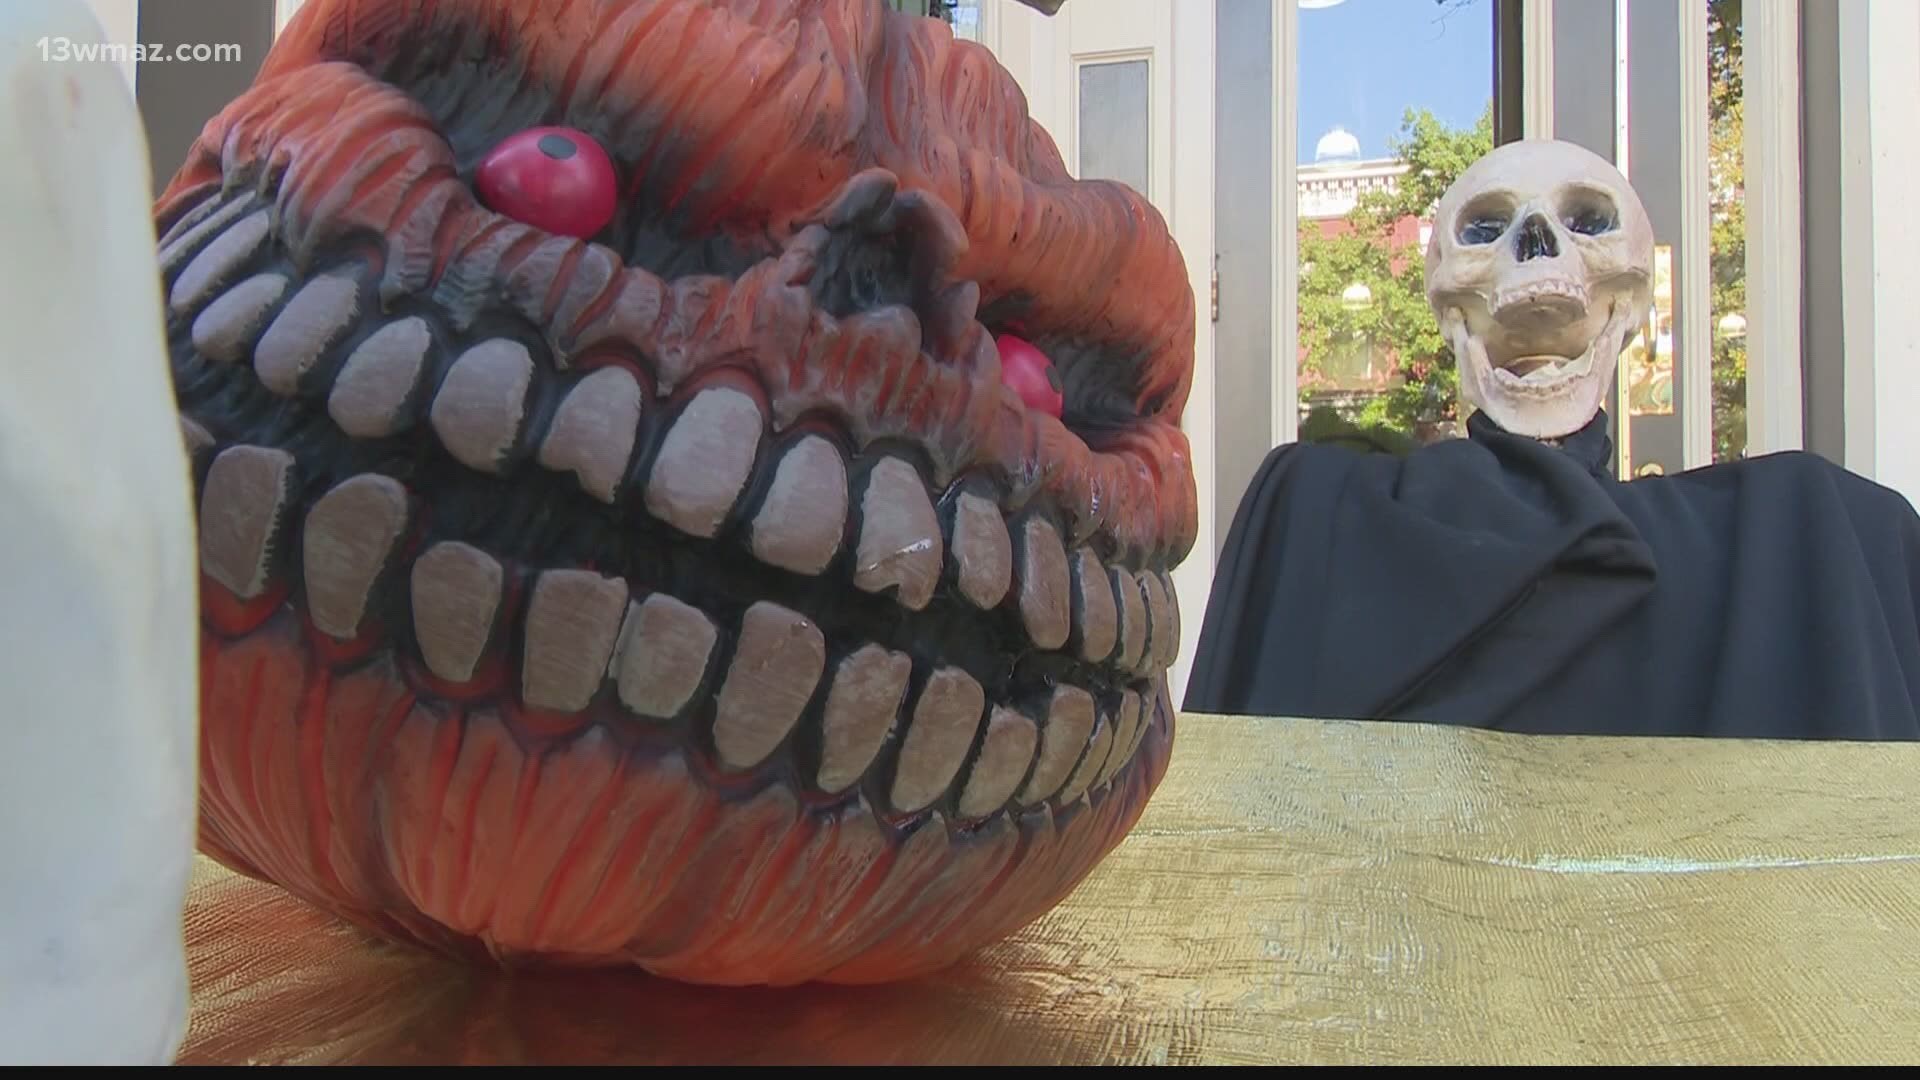 Halloween is next month, and Houston County is preparing for a fun, but safe holiday. Here's what residents plan to do.